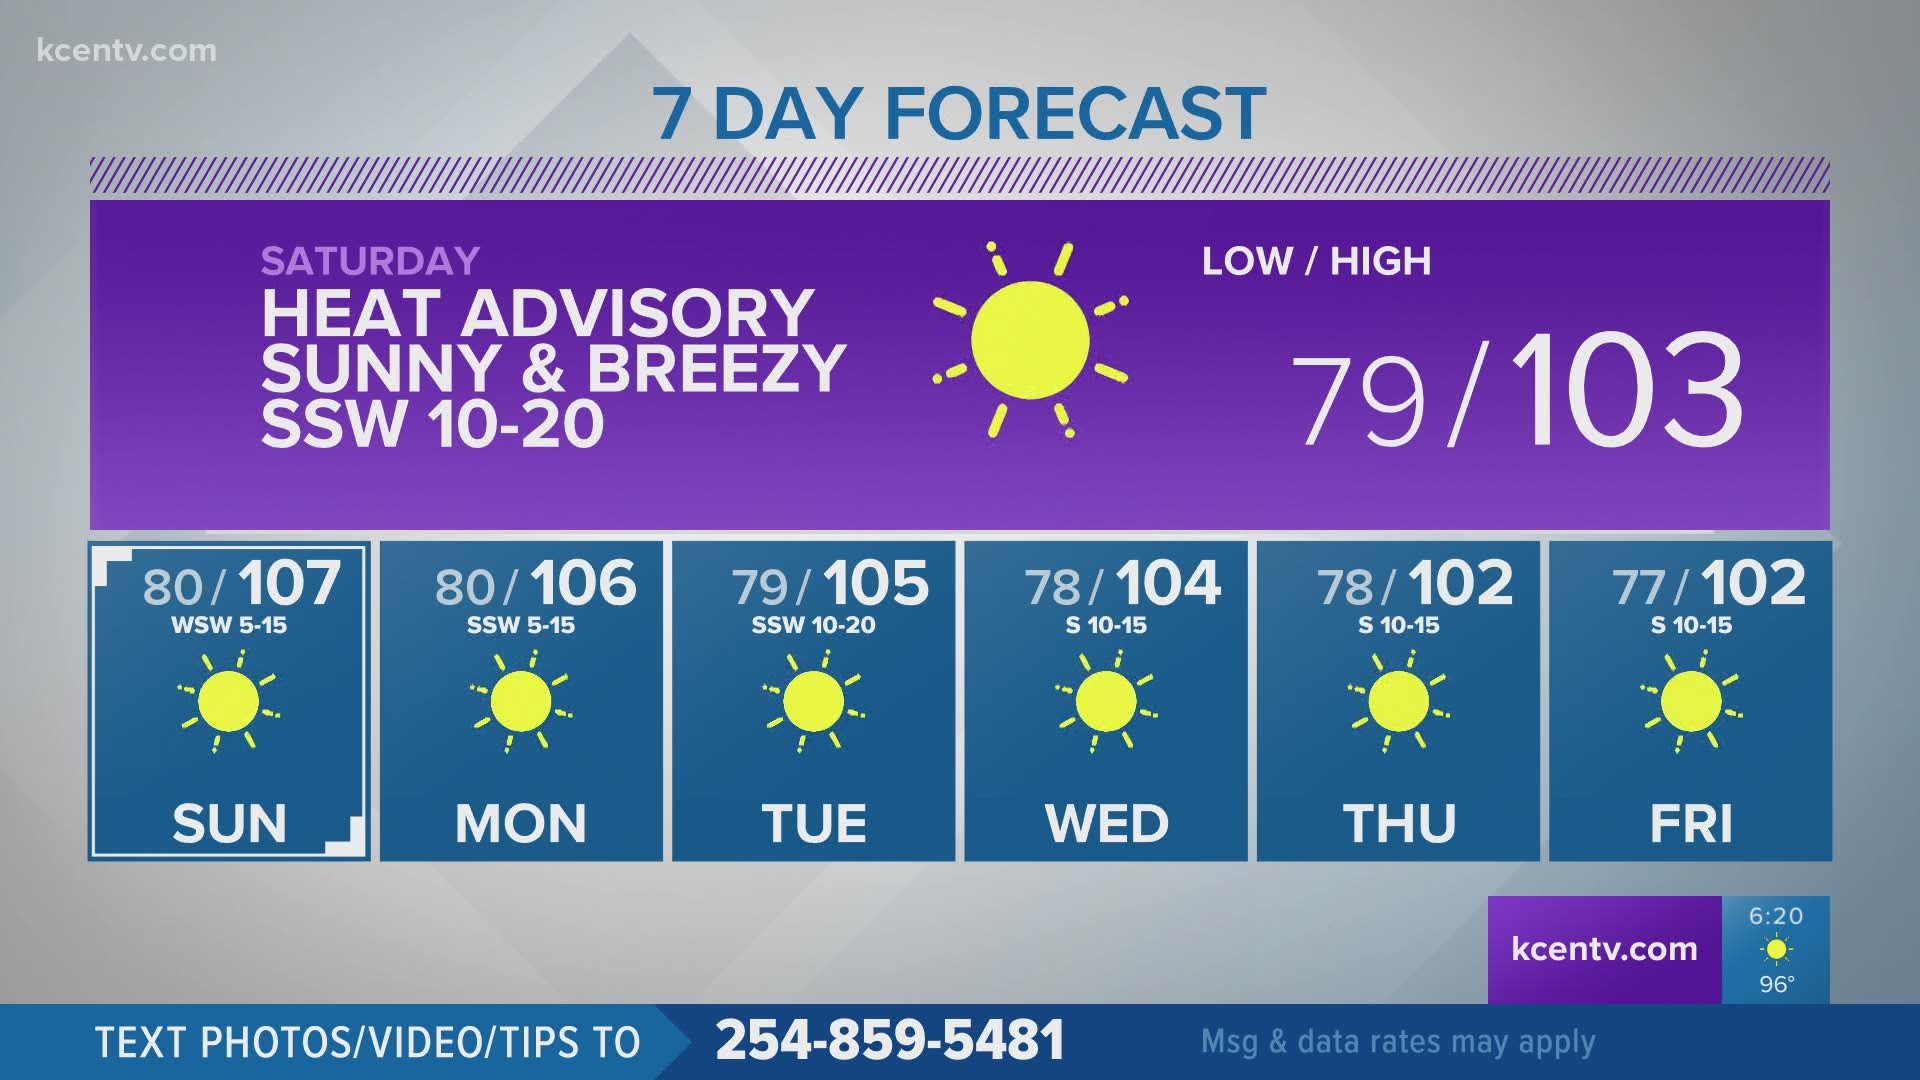 You can expect a sunny, hot and breezy Saturday.